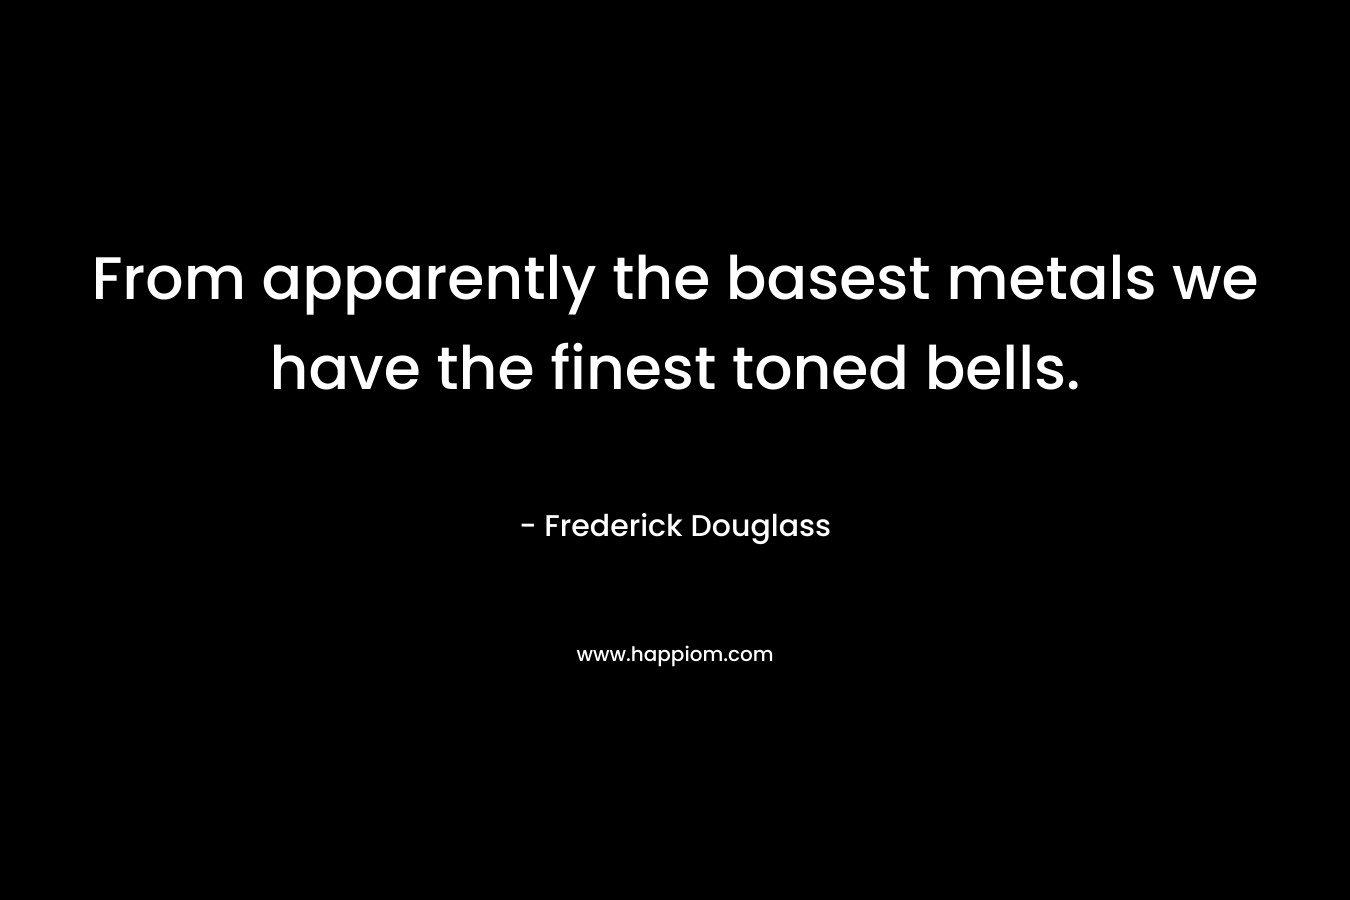 From apparently the basest metals we have the finest toned bells.